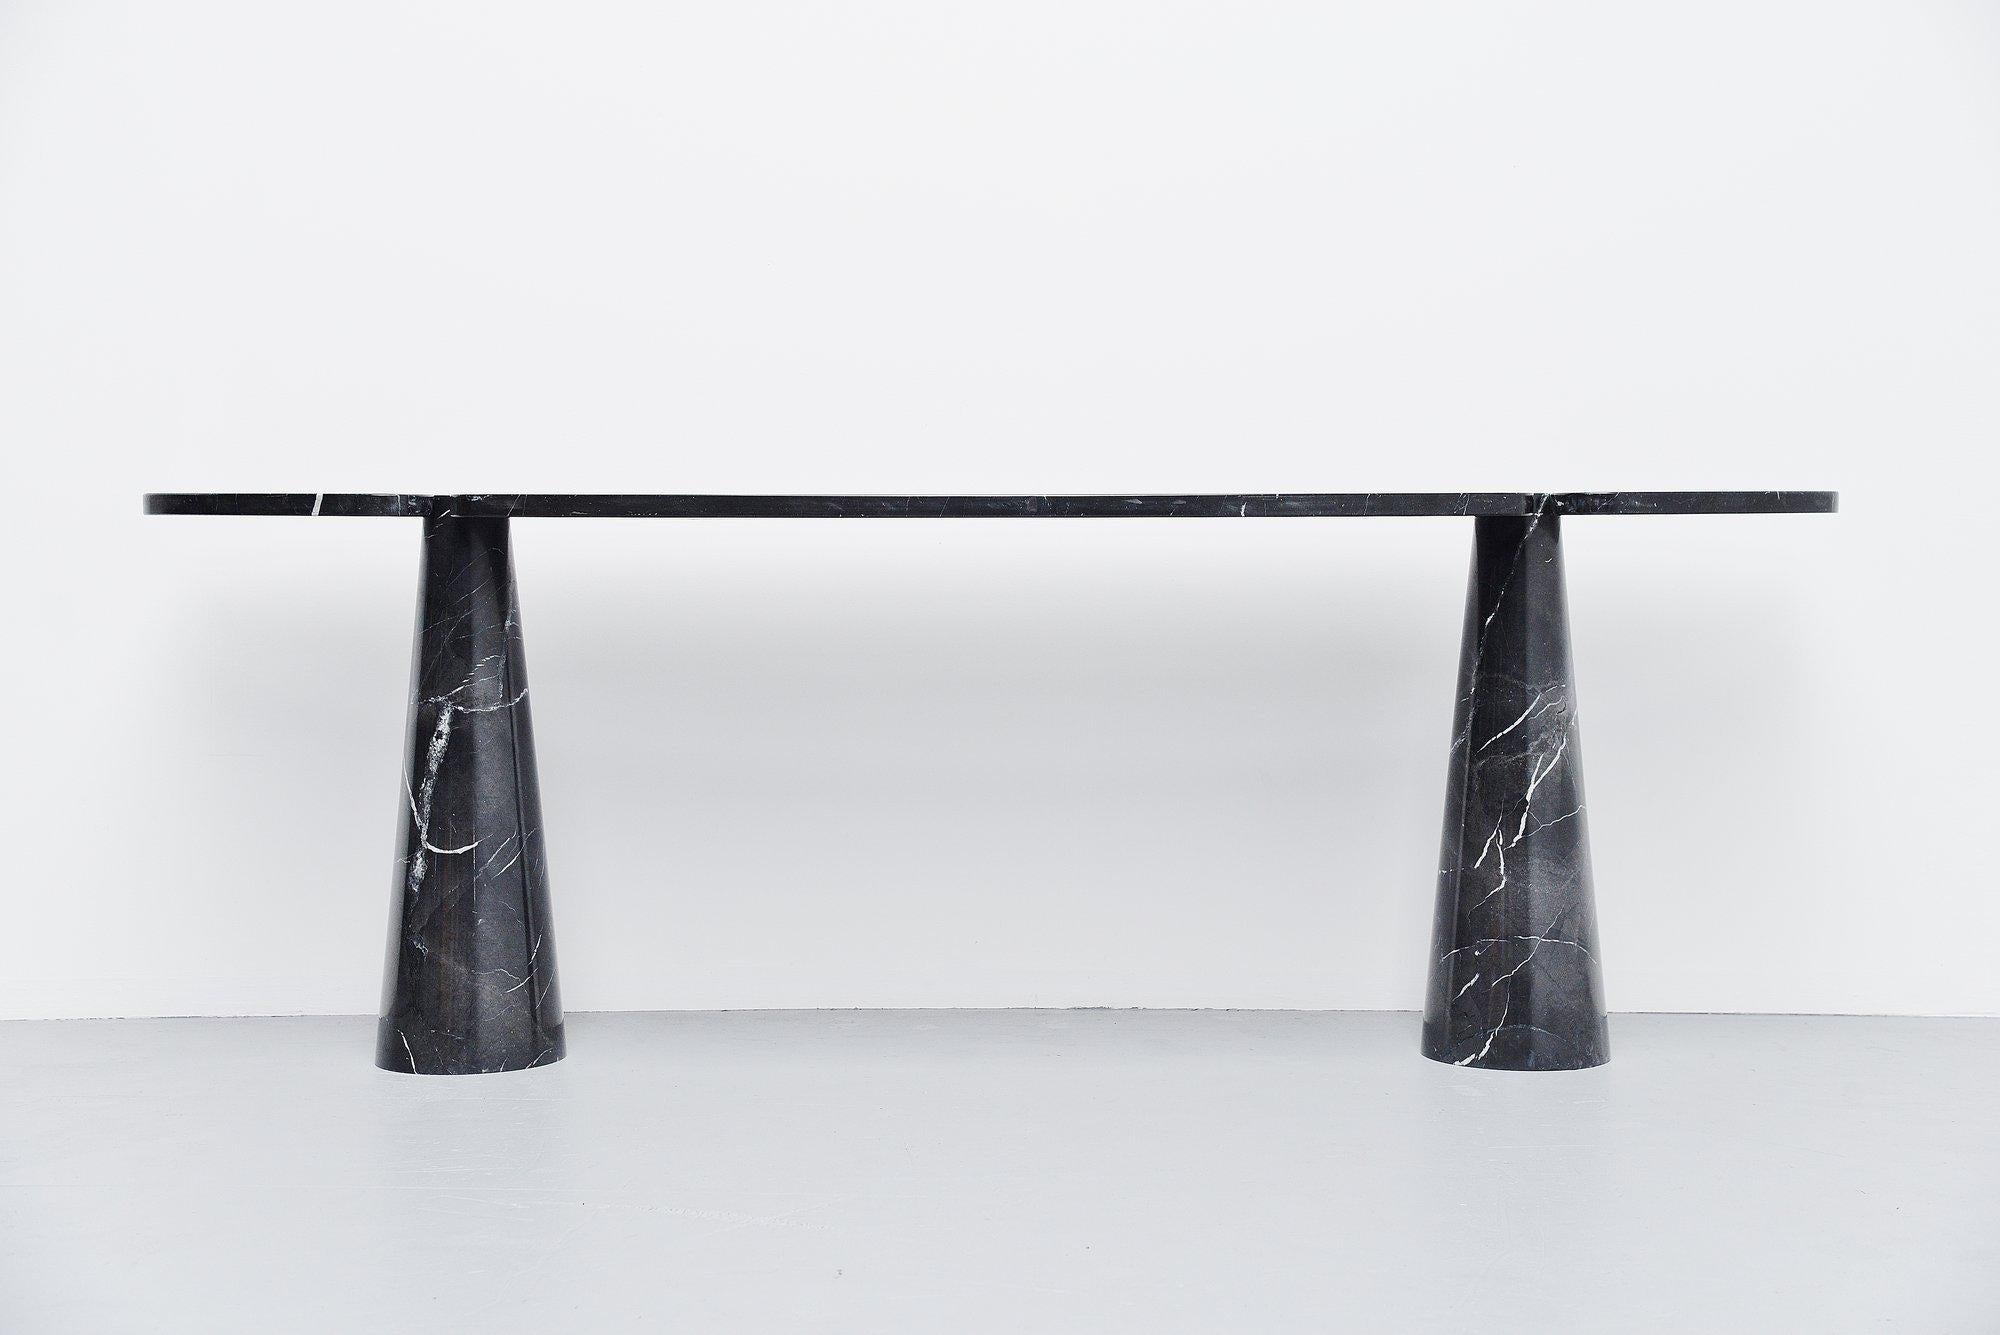 Spectacular ‘Eros’ console table designed by Angelo Mangiarotti and manufactured by Skipper, Italy 1971. This console table is made of black marquina marble and have beautiful white veins in the black marble. This console table comes from the Eros